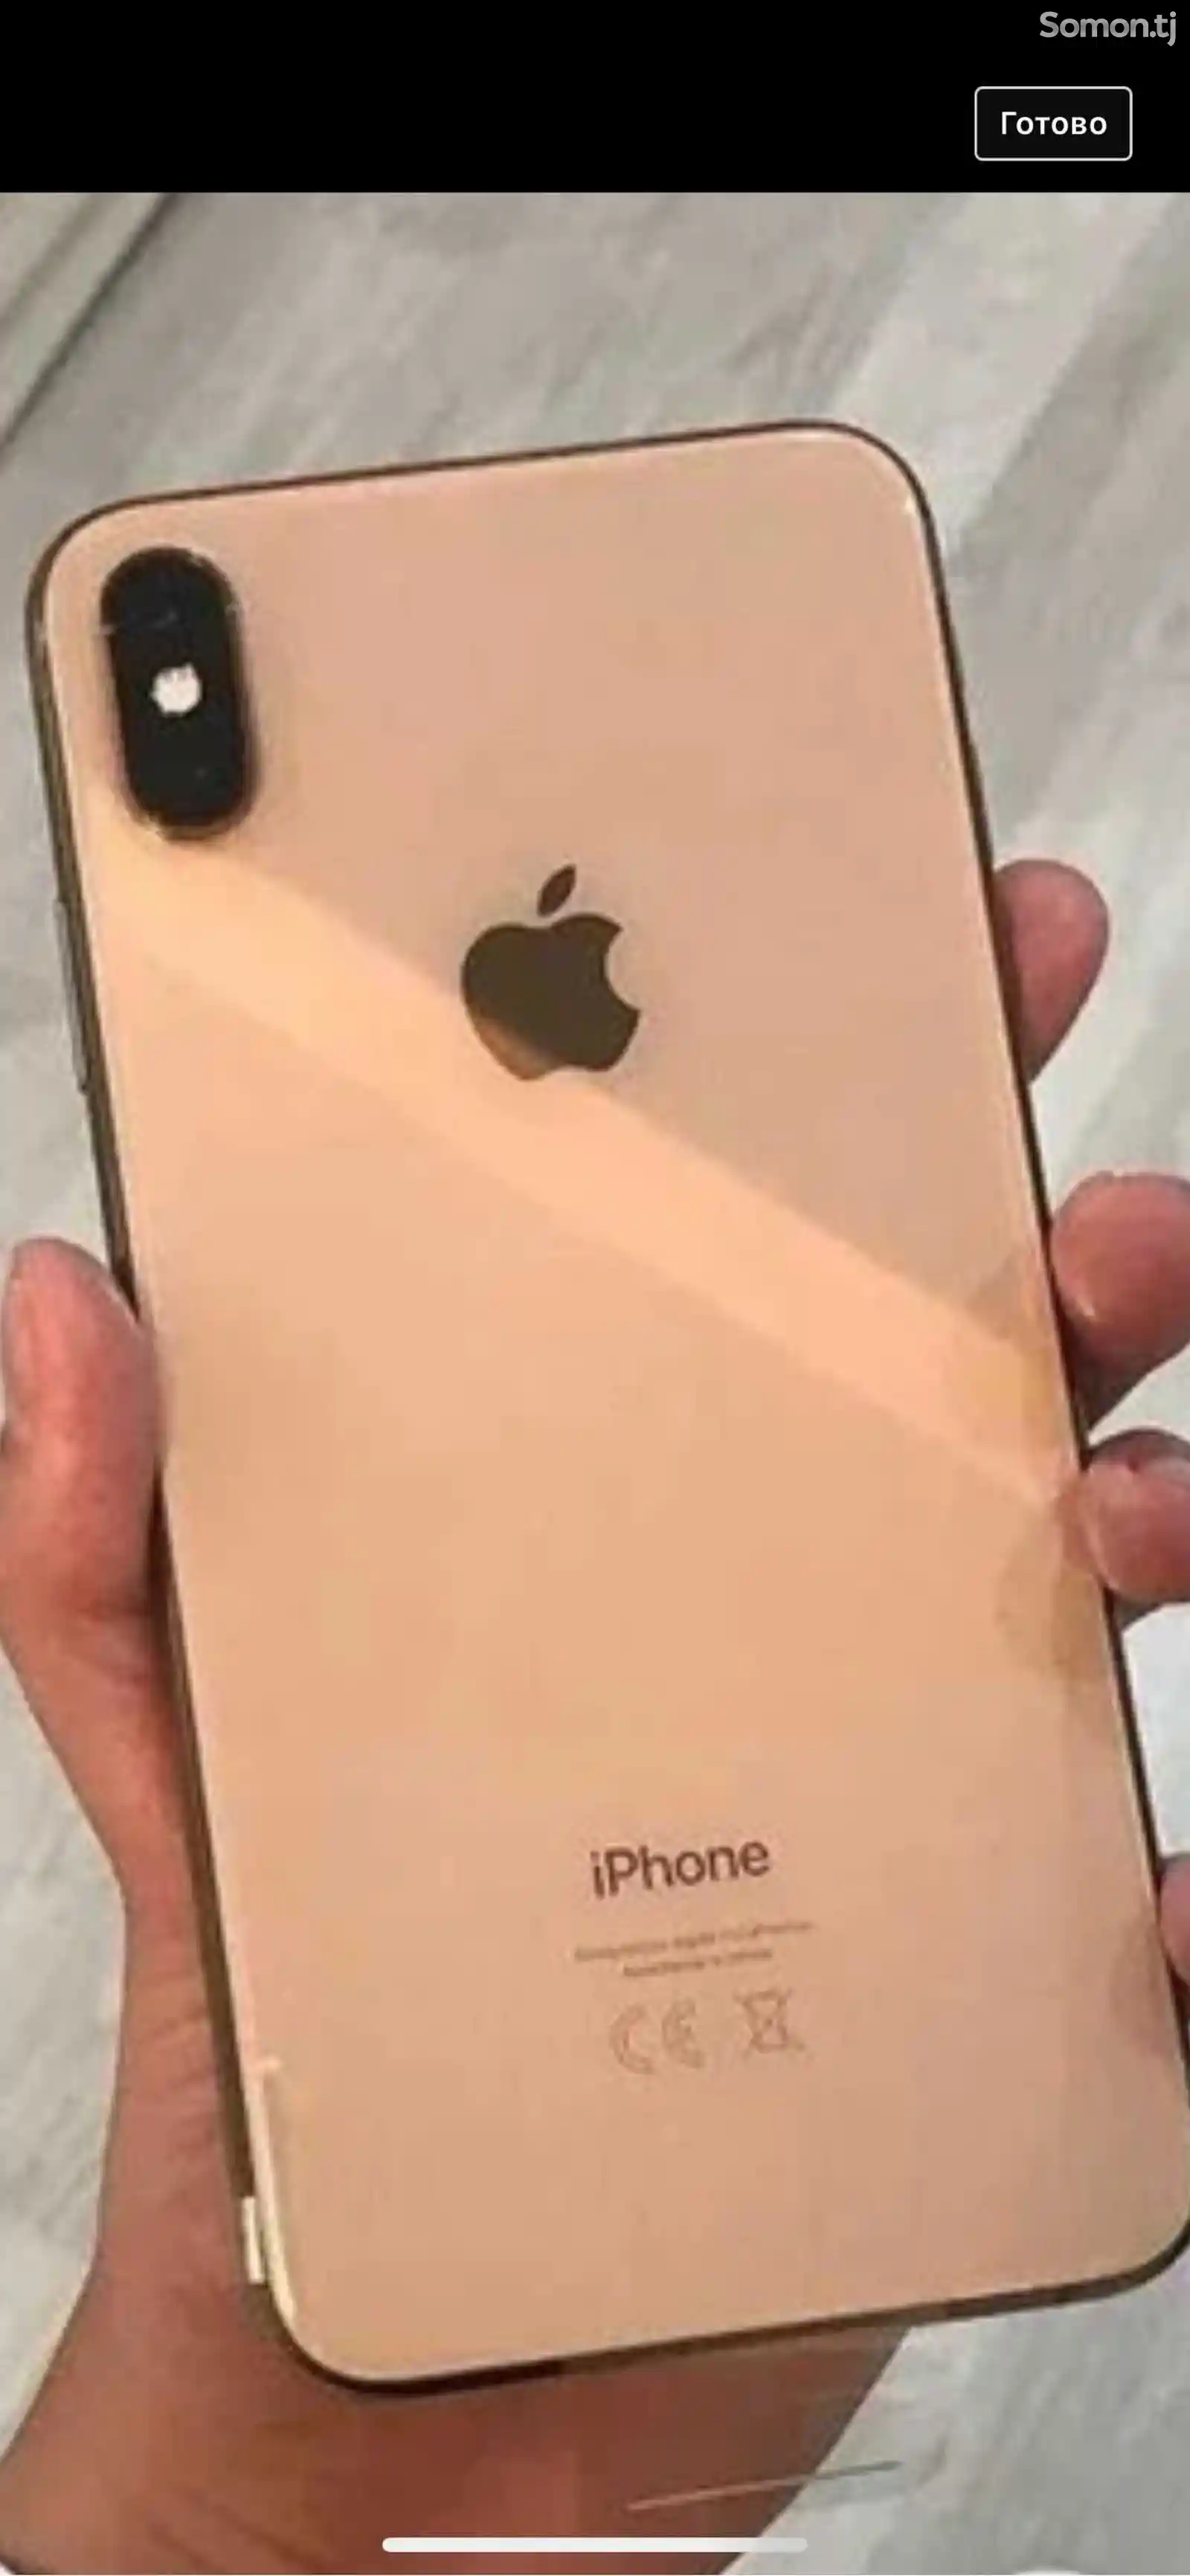 Apple iPhone Xs Max, Gold